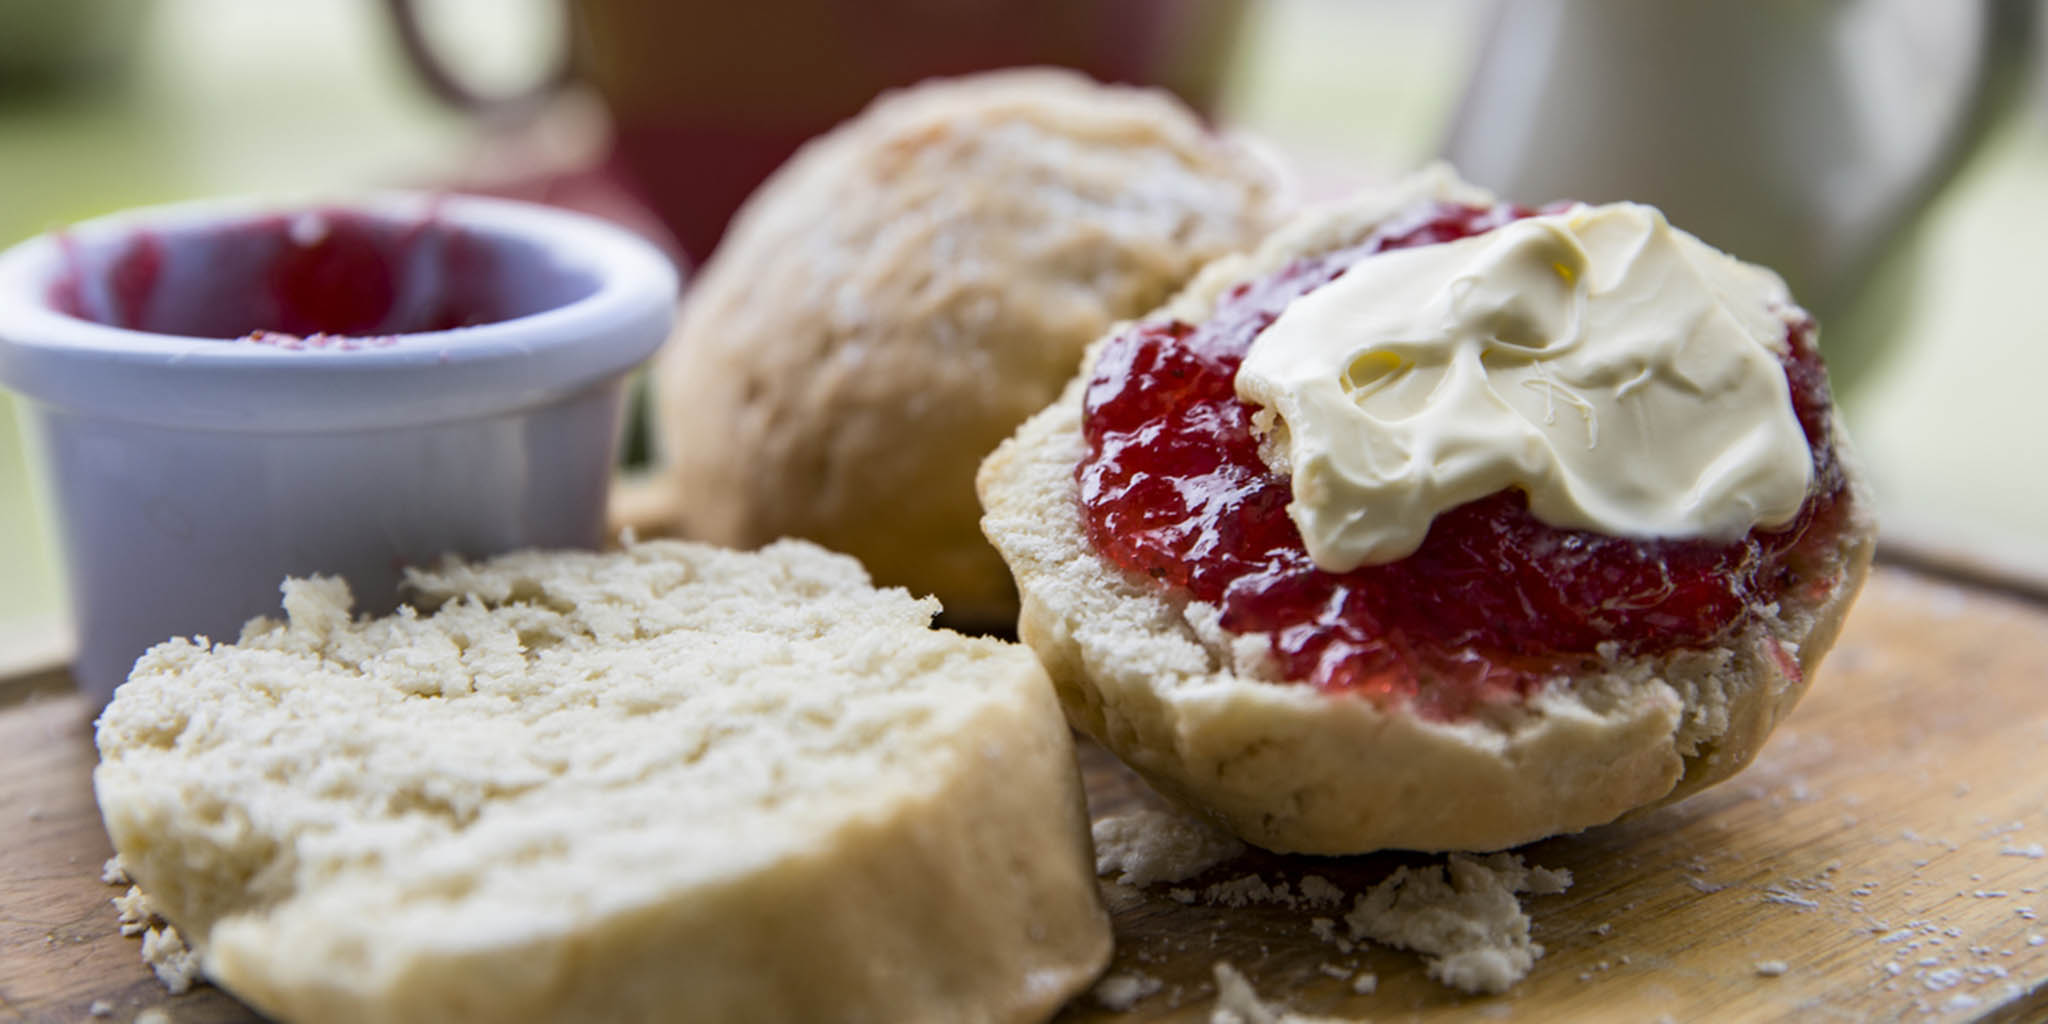  Join us for   Afternoon Cream Tea  